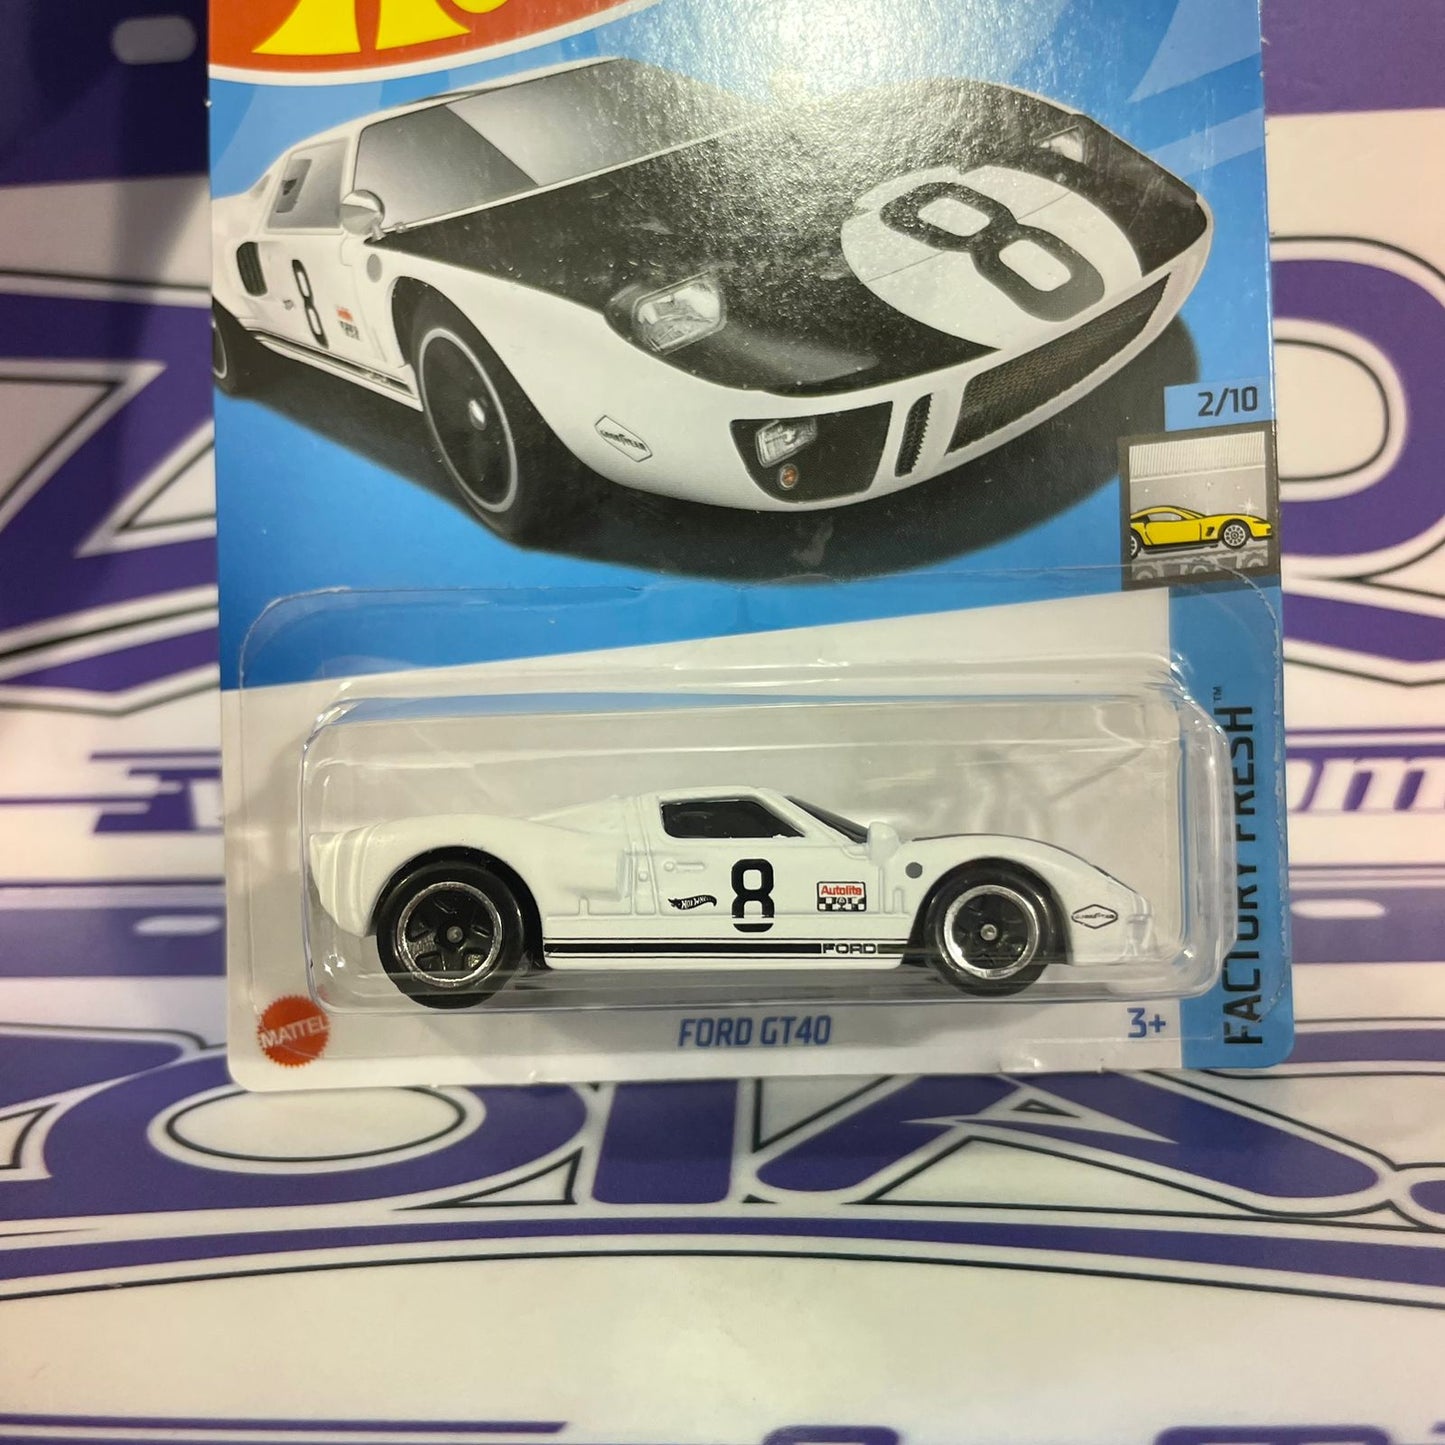 HTC51 Ford Gt40